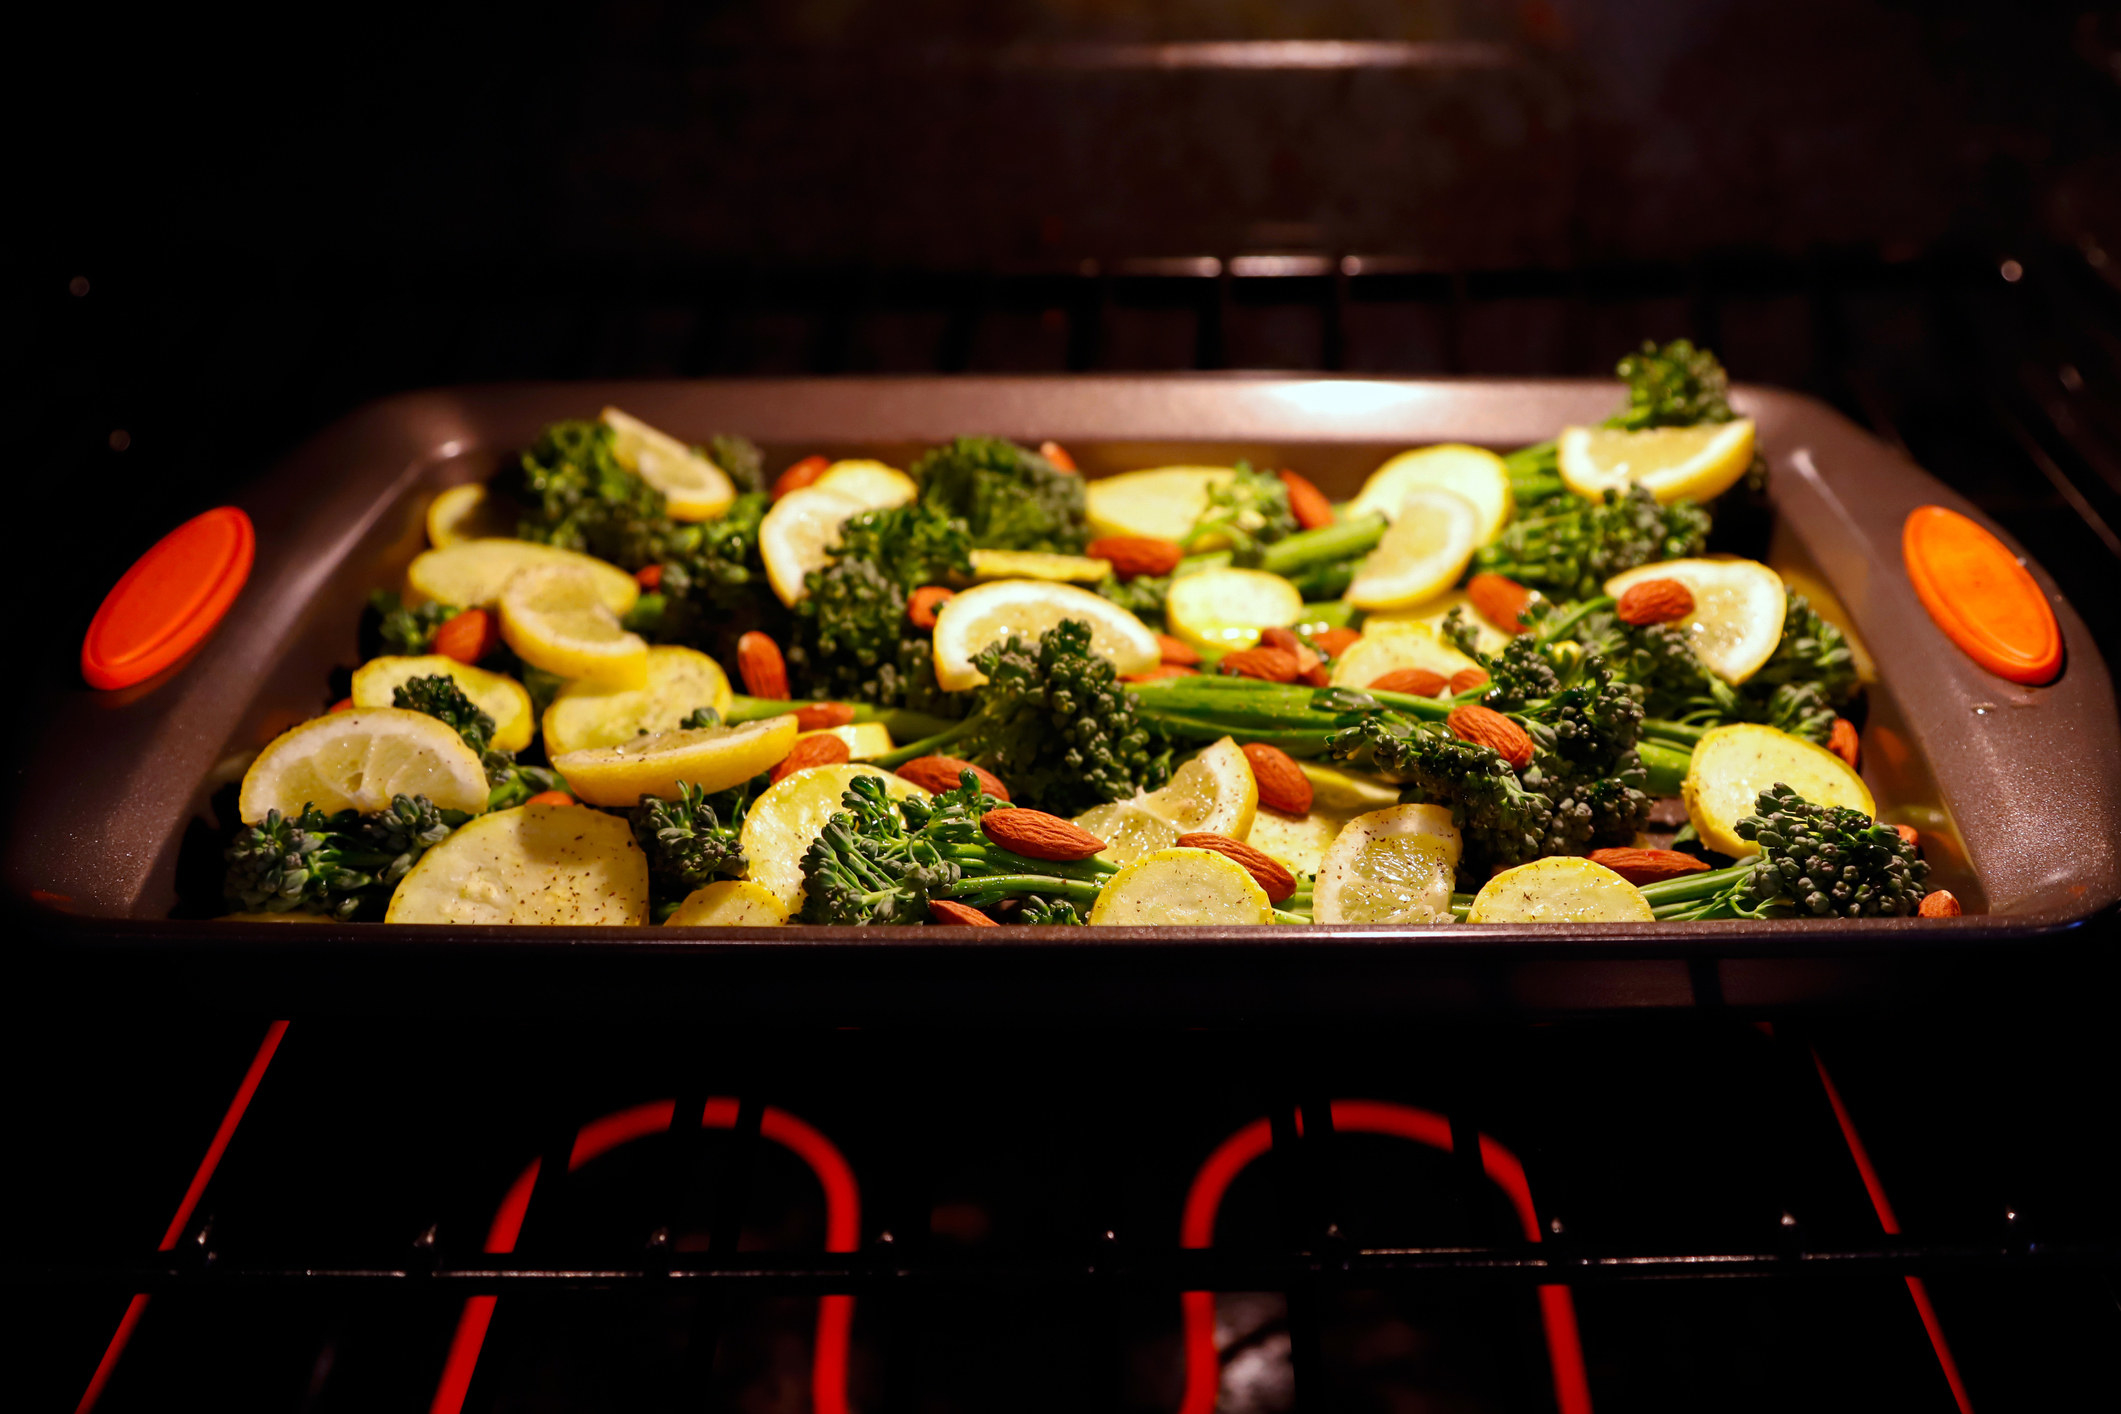 Vegetables roasting in the oven.